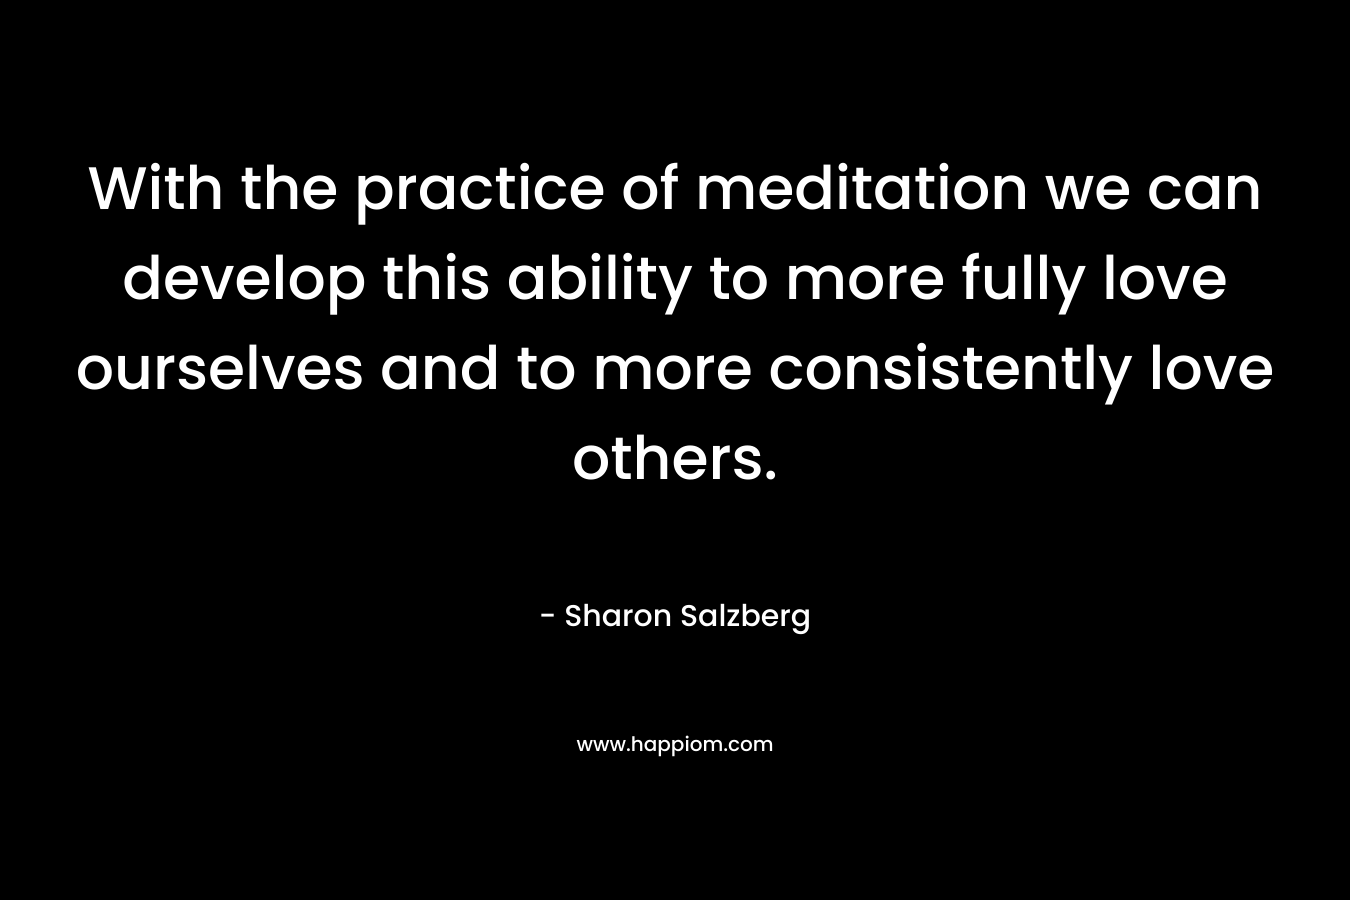 With the practice of meditation we can develop this ability to more fully love ourselves and to more consistently love others.